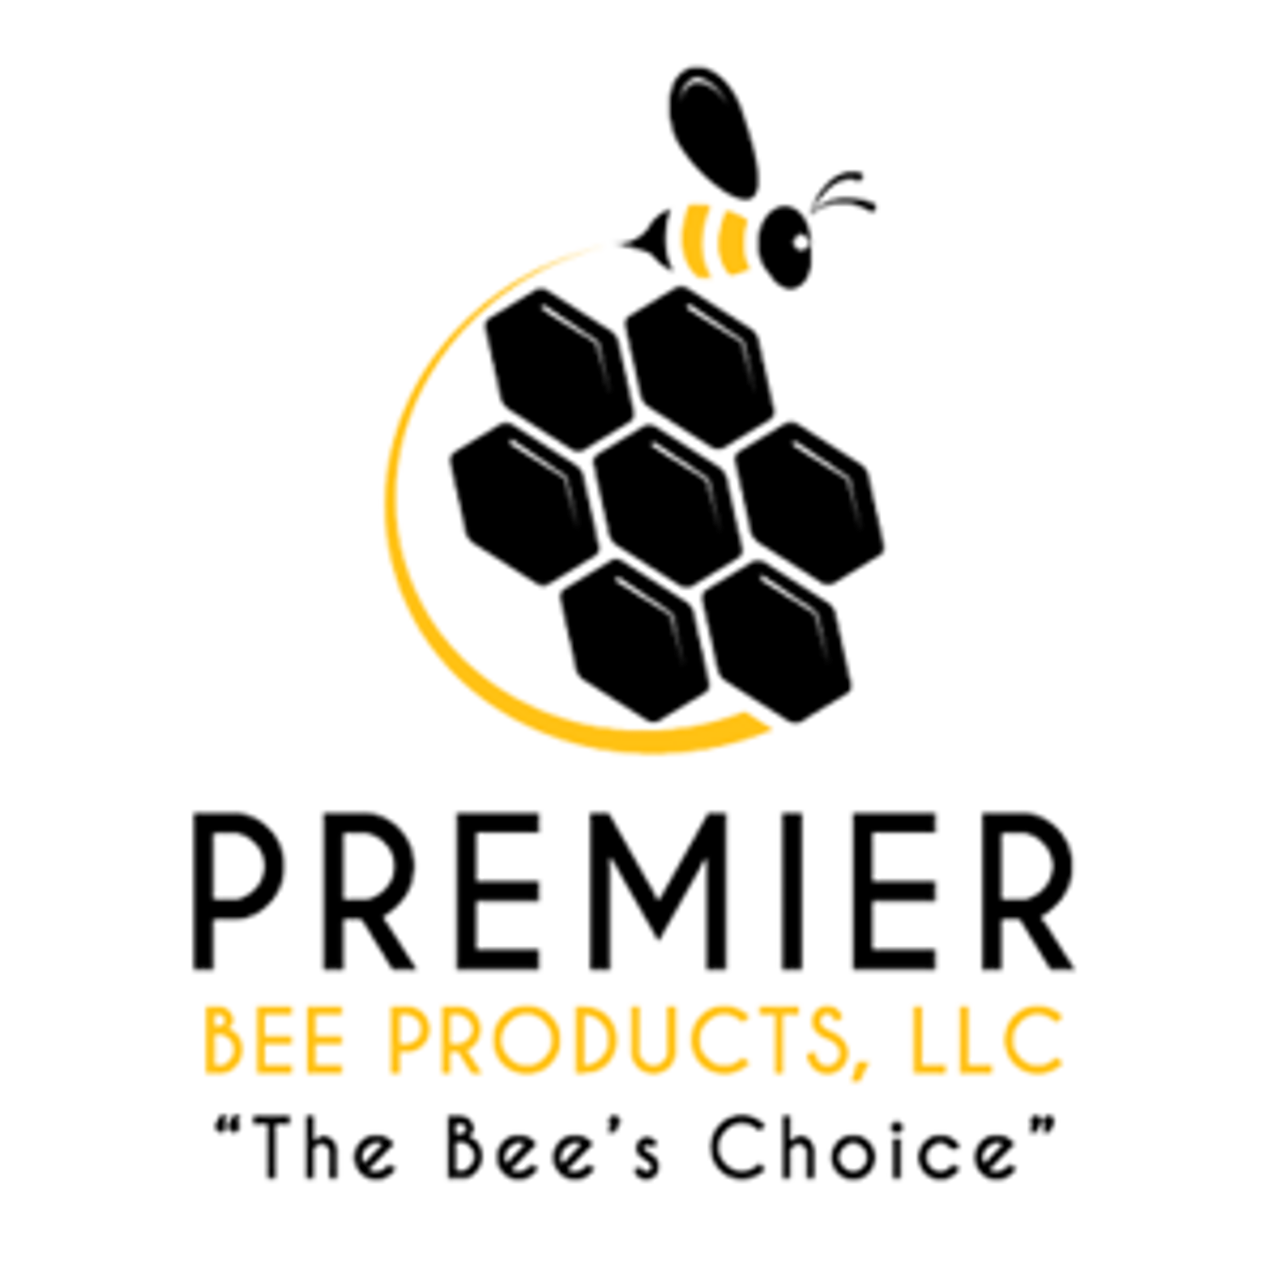 Premier Bee Products Logo